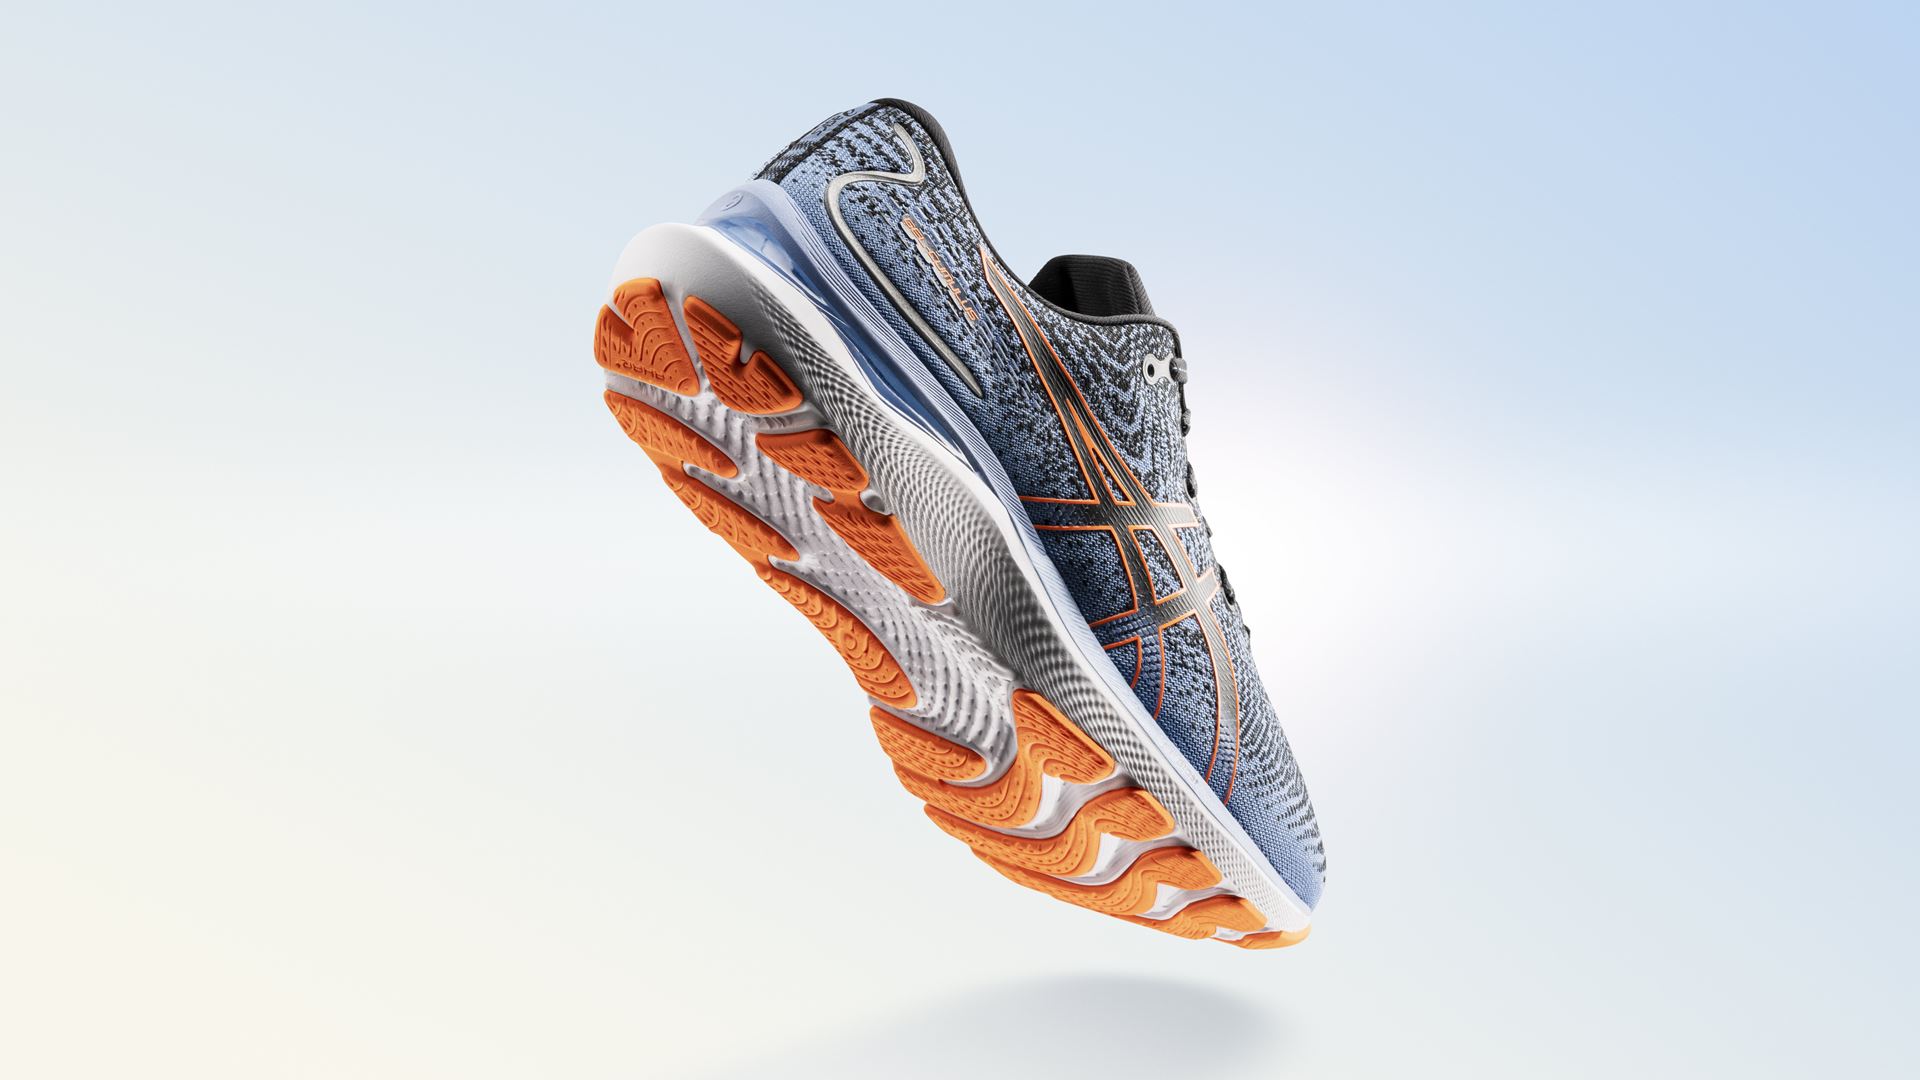 New ASICS FF BLAST™ cushioning technology offers advanced durability and comfort for the wearer